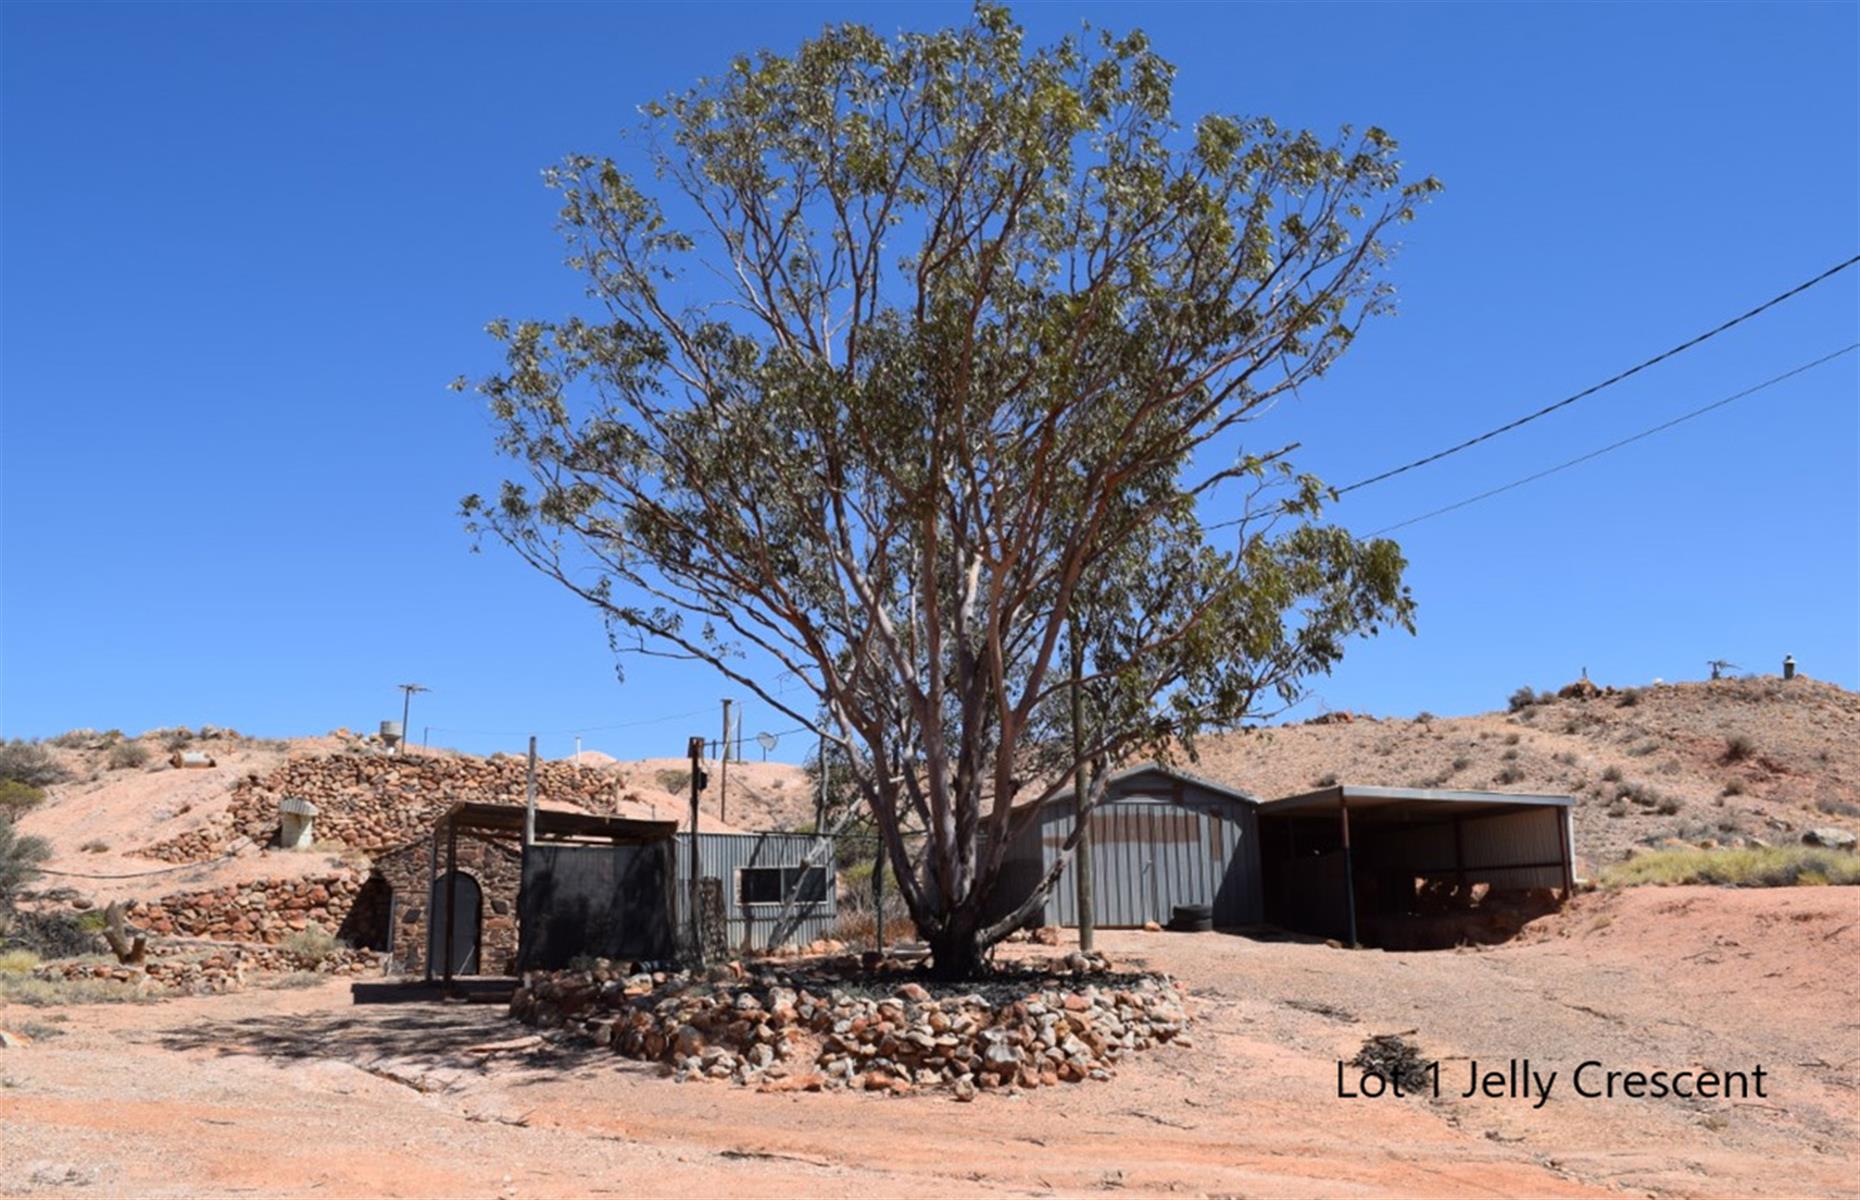 <p>Warren Andrews, director of Andrews Property, told <em><a href="https://www.thesun.co.uk/news/22080044/town-australia-selling-houses-cheap-coober-pedy/">The Sun</a></em> that some of the bills dated back three years. He added that some of the properties that were up for auction are still in good condition, while others need a lot of work. As a result, bidding opened at just £2,665 ($3.4k / AU$5.1k) on the cheapest lot and by the time the auction was over, all the properties had sold, with buyers snapping up bargains for as little as £8,550 ($10.9k / AU$16.3k). This <a href="https://www.domain.com.au/lot-2028-monument-road-coober-pedy-sa-5723-2018465928">Jelly Crescent home</a>, which was bought by one lucky bidder, is typical of the area, with corrugated metal structures above ground and the main house below. </p>